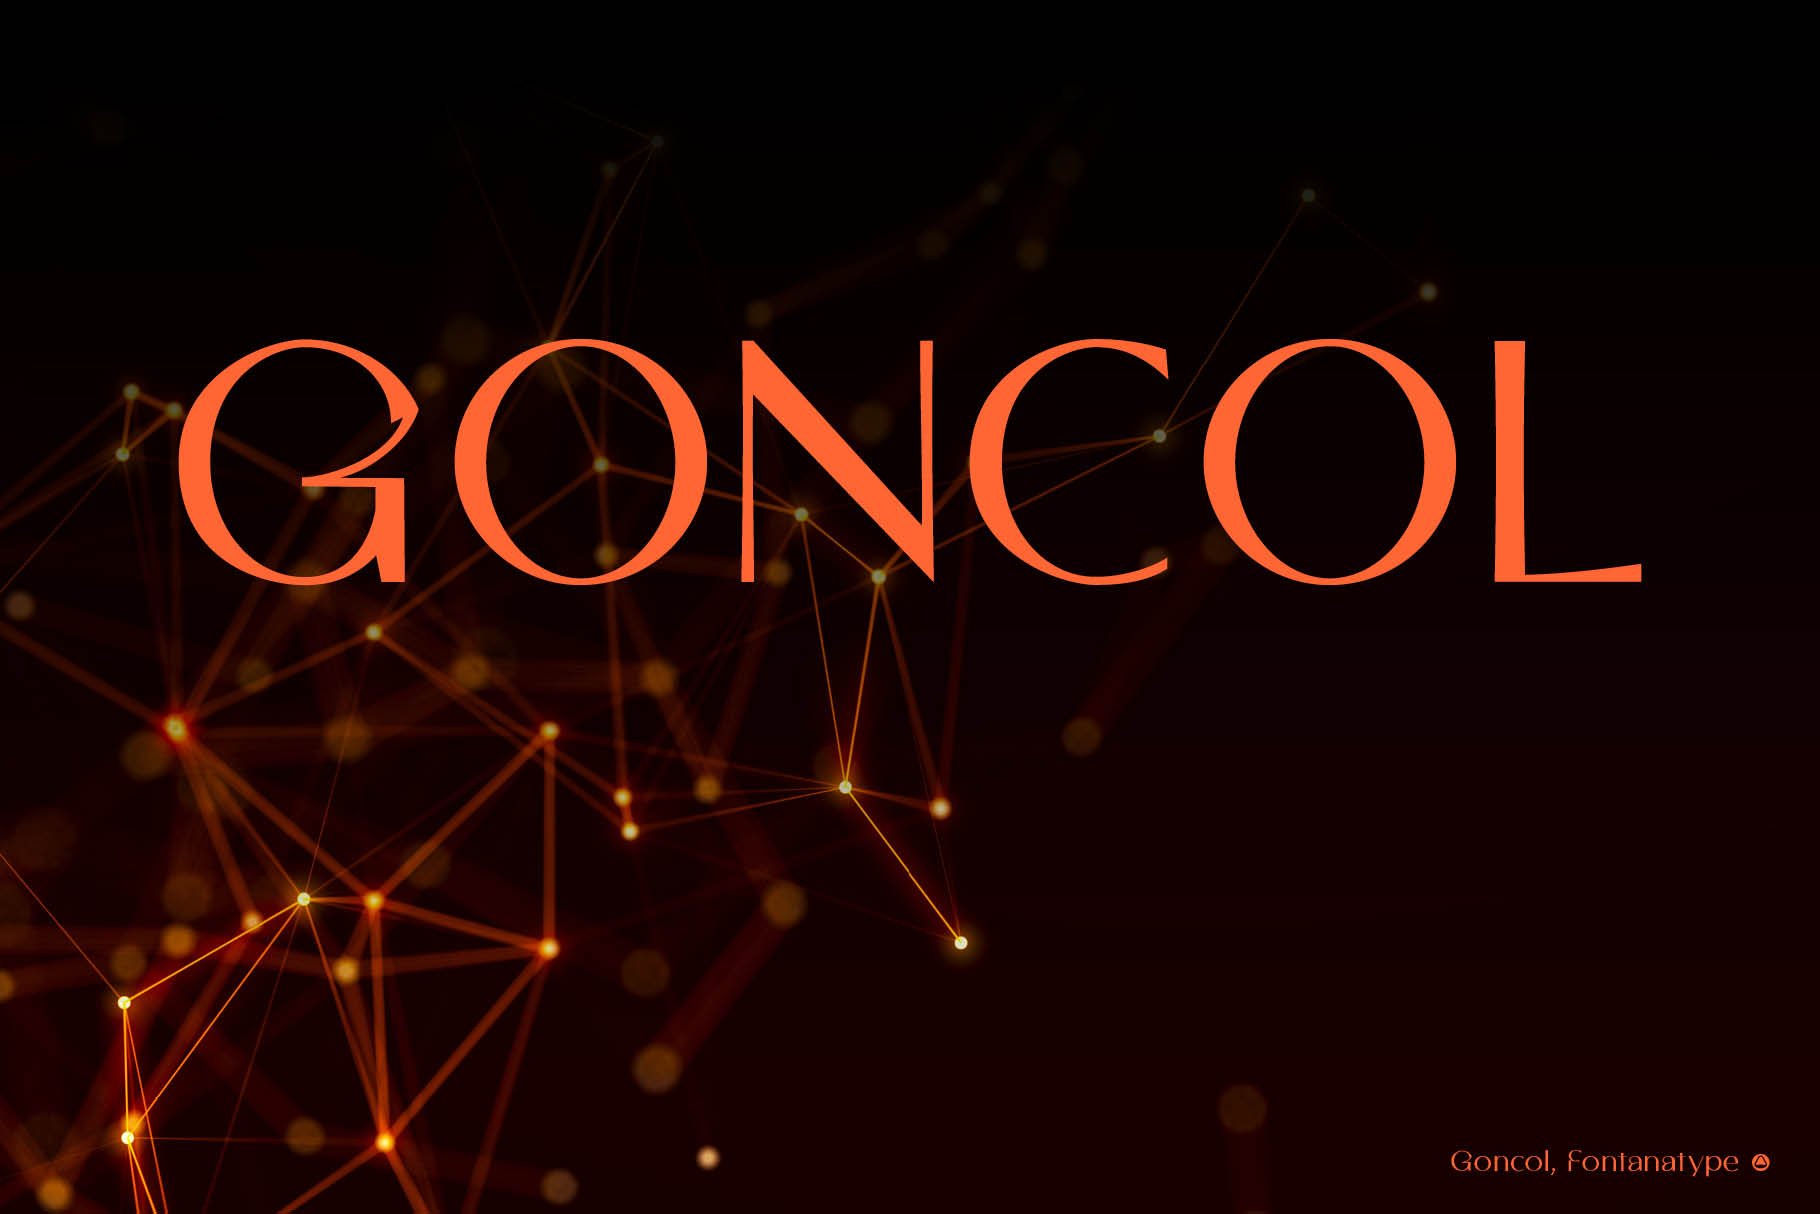 Goncol cover image.